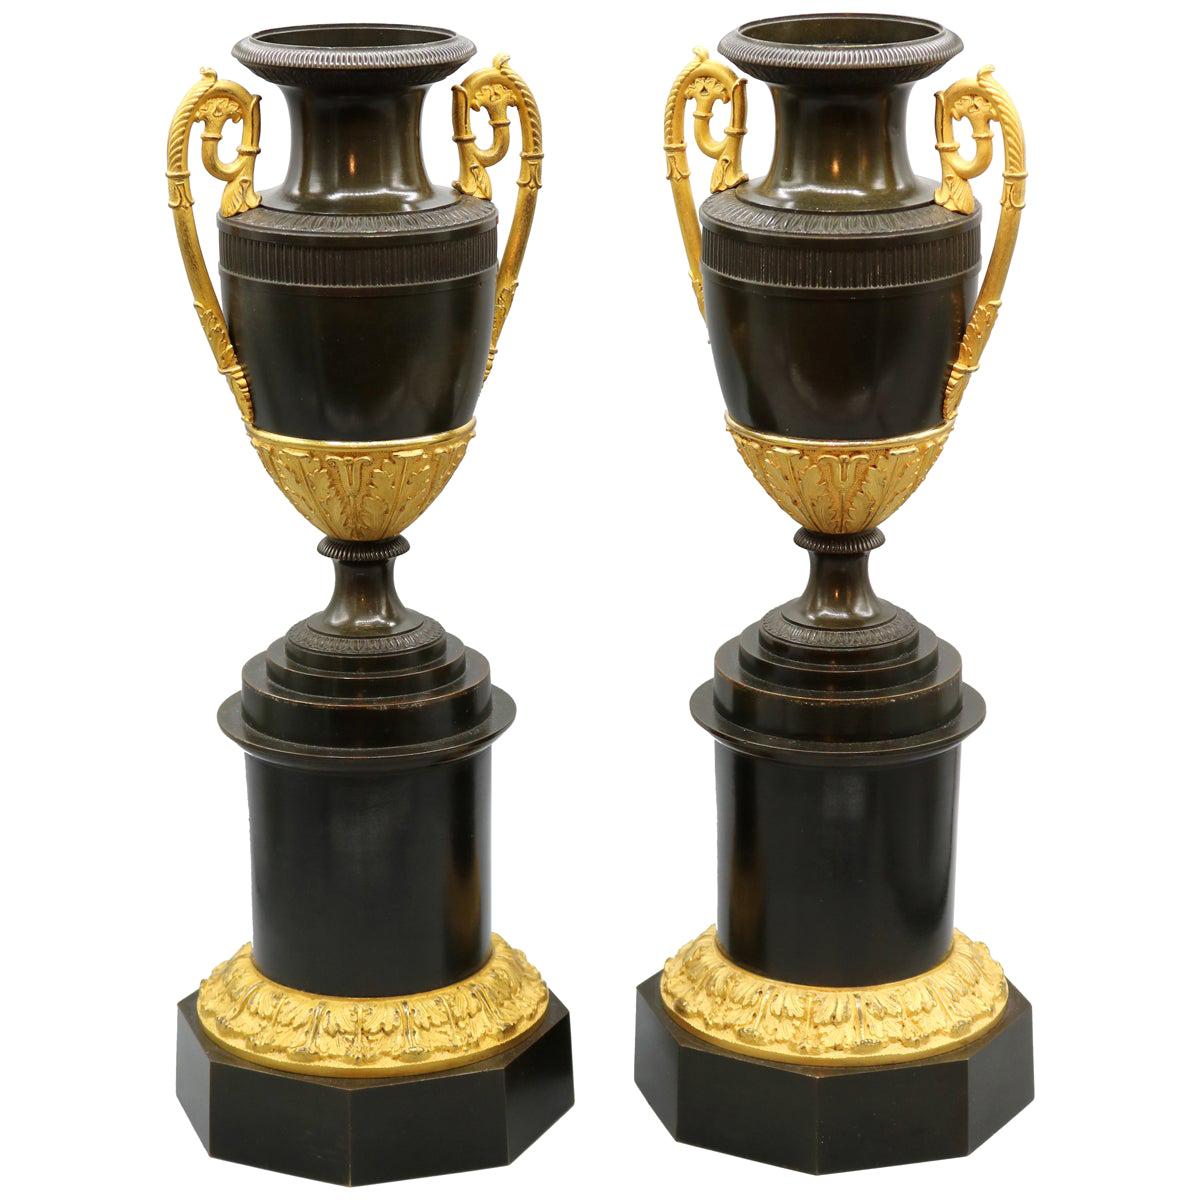 Pair of Early 19th Century Regency Period Classic Vases in Bronze and Ormolu For Sale